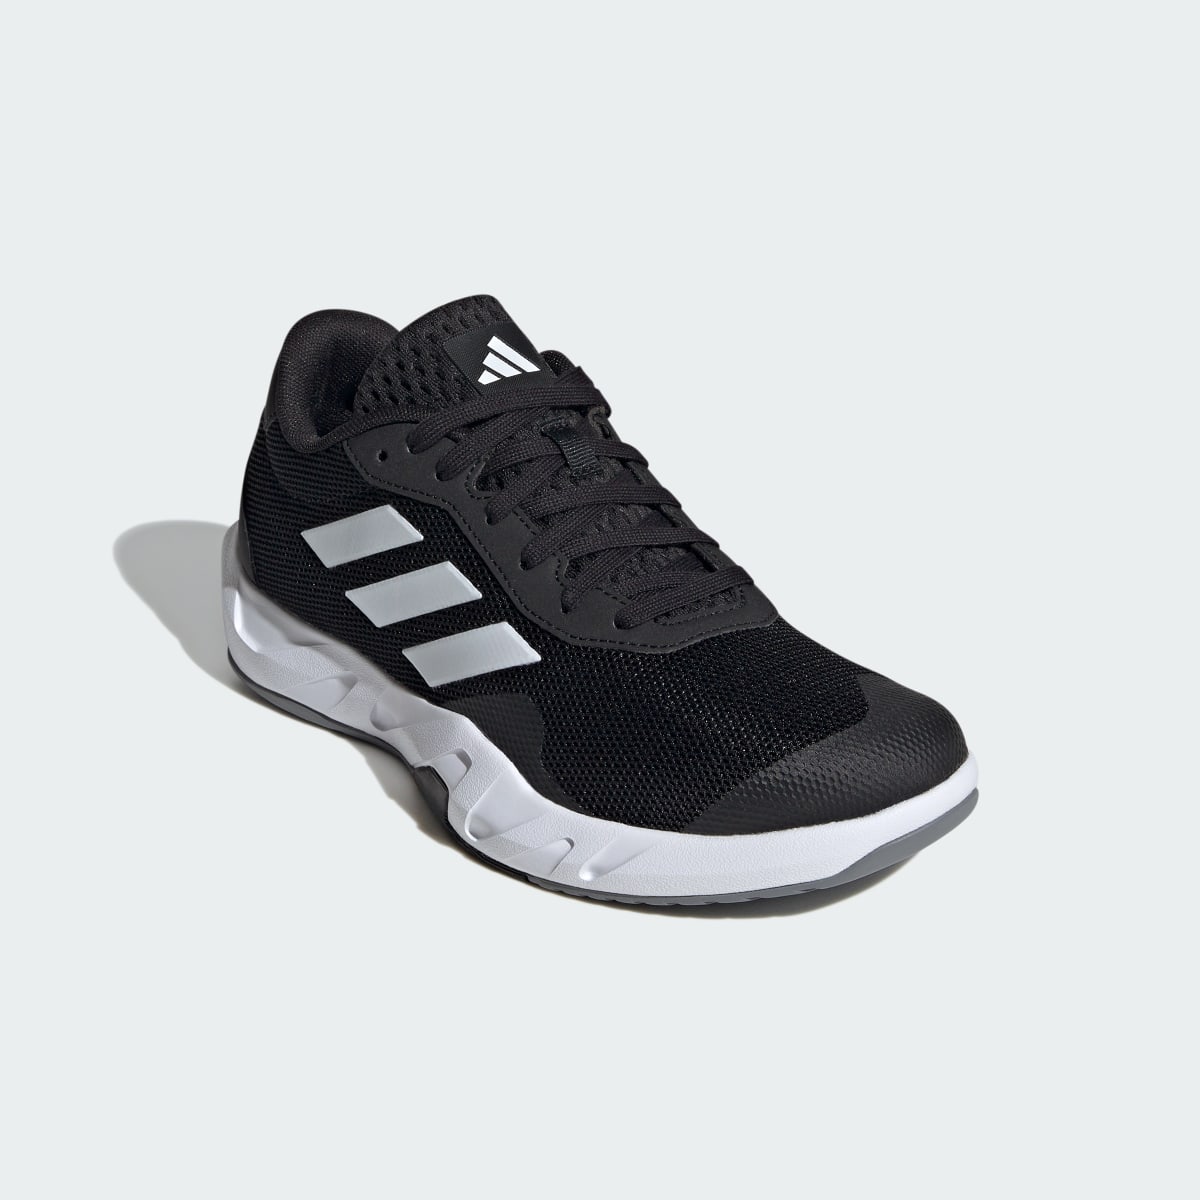 Adidas Amplimove Trainer Shoes. 5